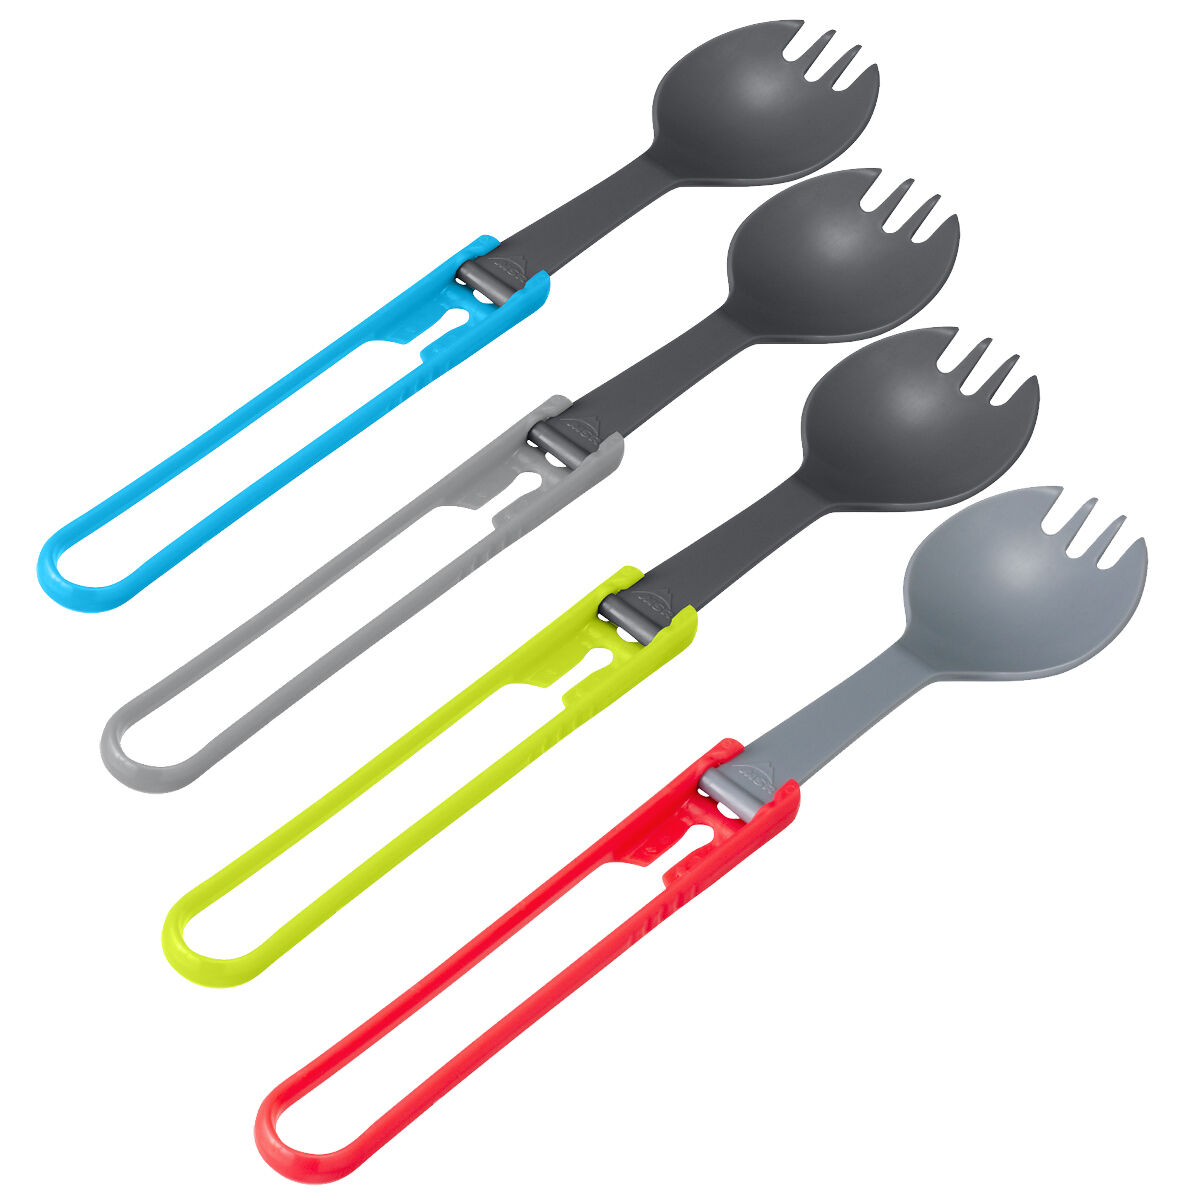 7.6-Inch Long Camping Backpacking Utensils M Spaghetti Salad Dessert Heavy Duty Flatware set Xesea Sporks 6-Pack 1.4-Inch Wide 18/10 Stainless Steel Sporks Everyday Use 